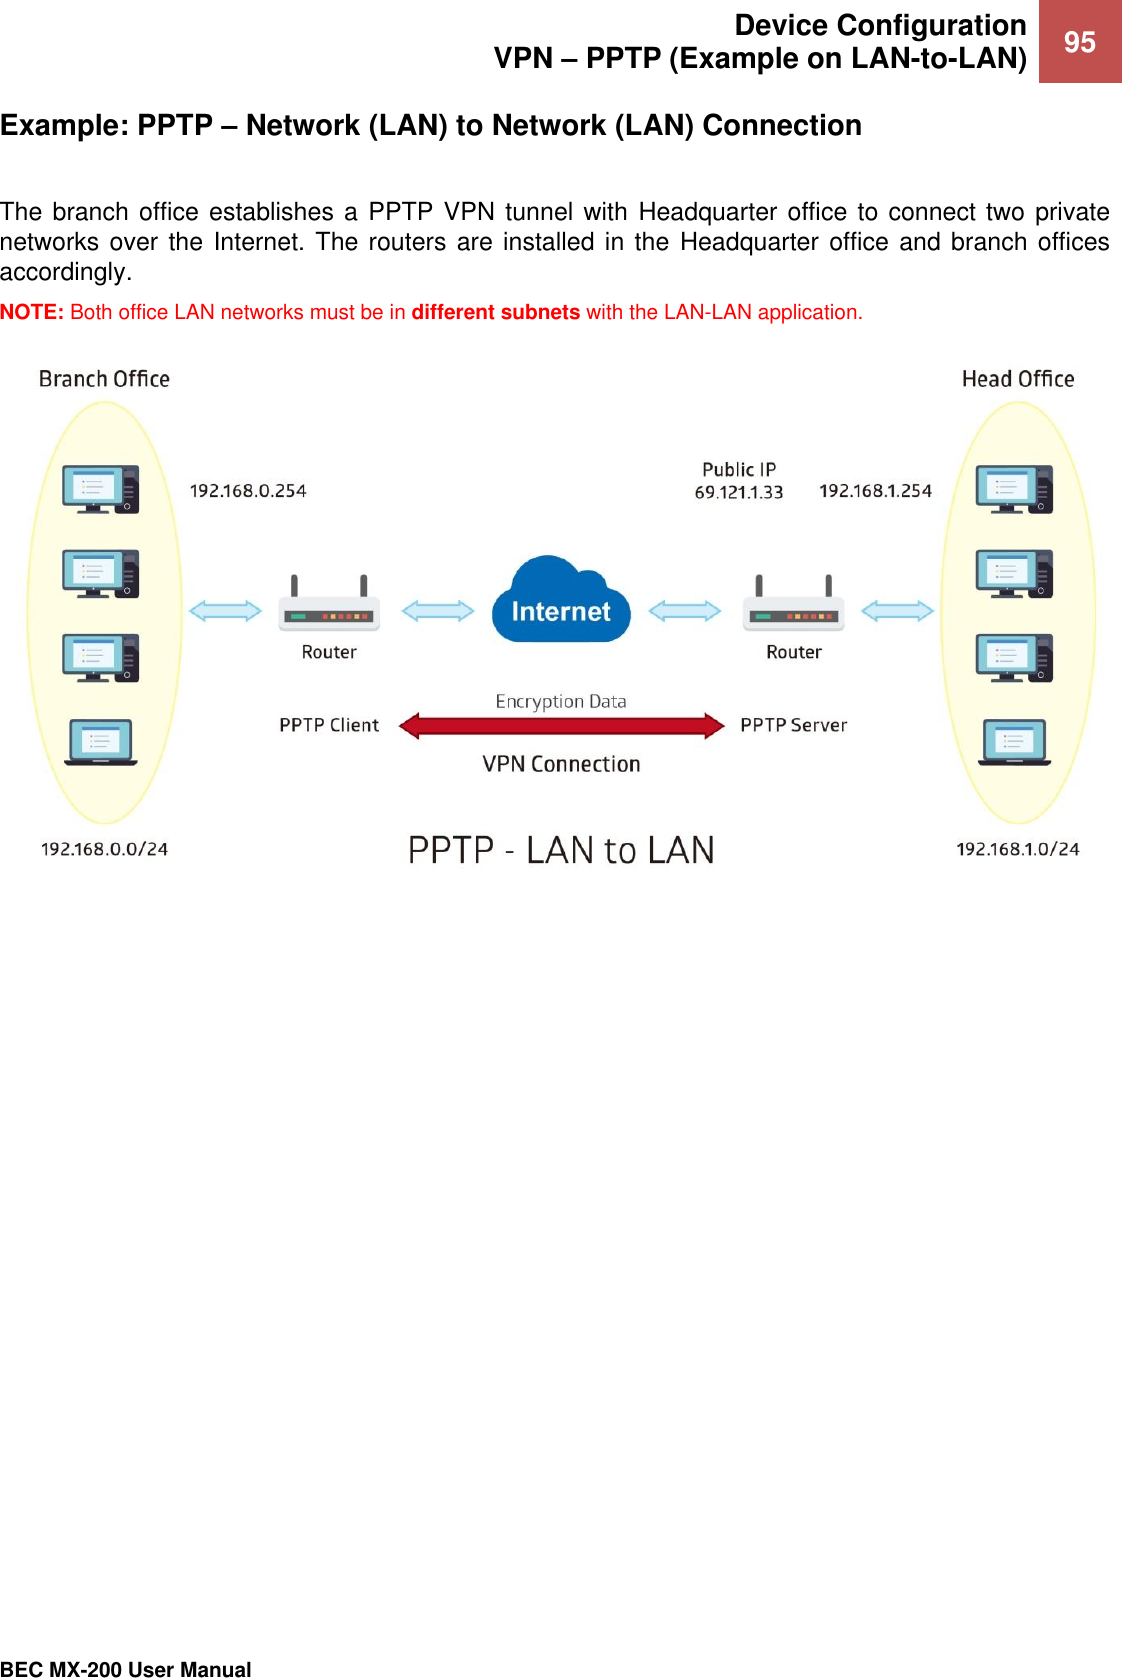  Device Configuration VPN – PPTP (Example on LAN-to-LAN) 95   BEC MX-200 User Manual  Example: PPTP – Network (LAN) to Network (LAN) Connection  The branch office establishes a PPTP VPN tunnel with  Headquarter office to connect two private networks over the Internet. The routers are installed in the  Headquarter office and branch offices accordingly. NOTE: Both office LAN networks must be in different subnets with the LAN-LAN application.  